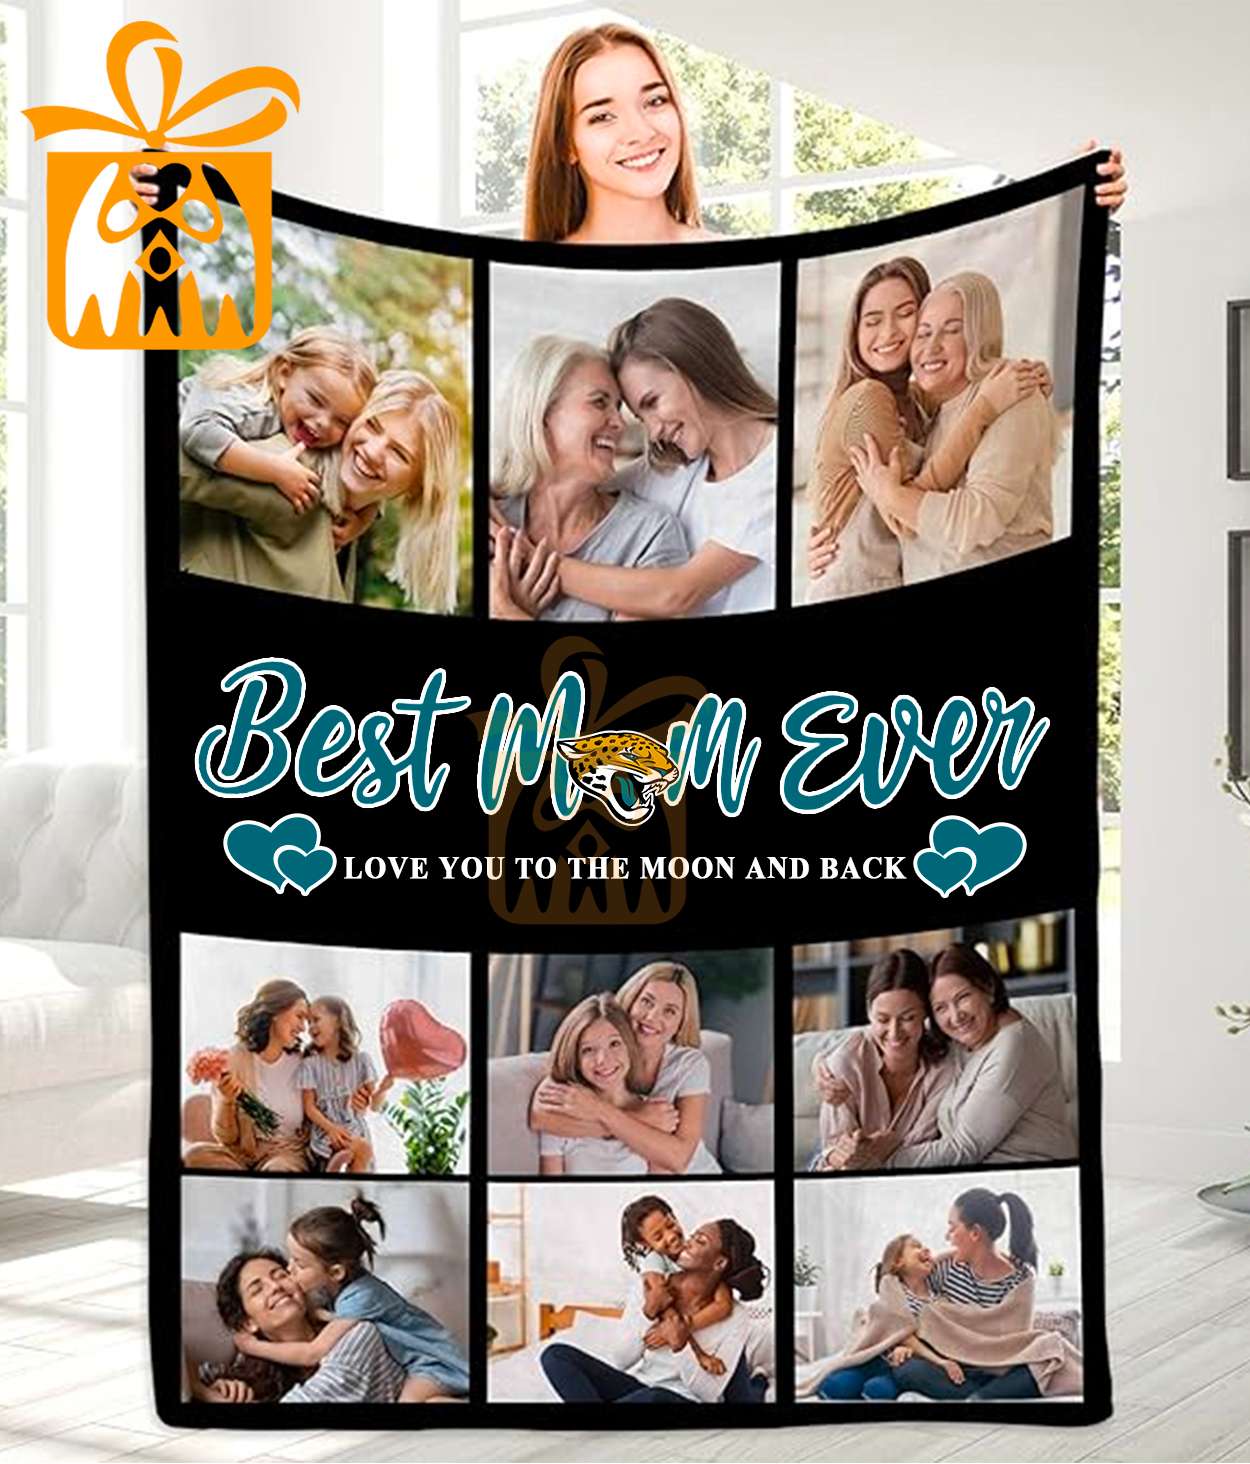 Best Mom Ever Custom NFL Jacksonville Jaguars Blankets with Pictures - Perfect Mother’s Day Gift